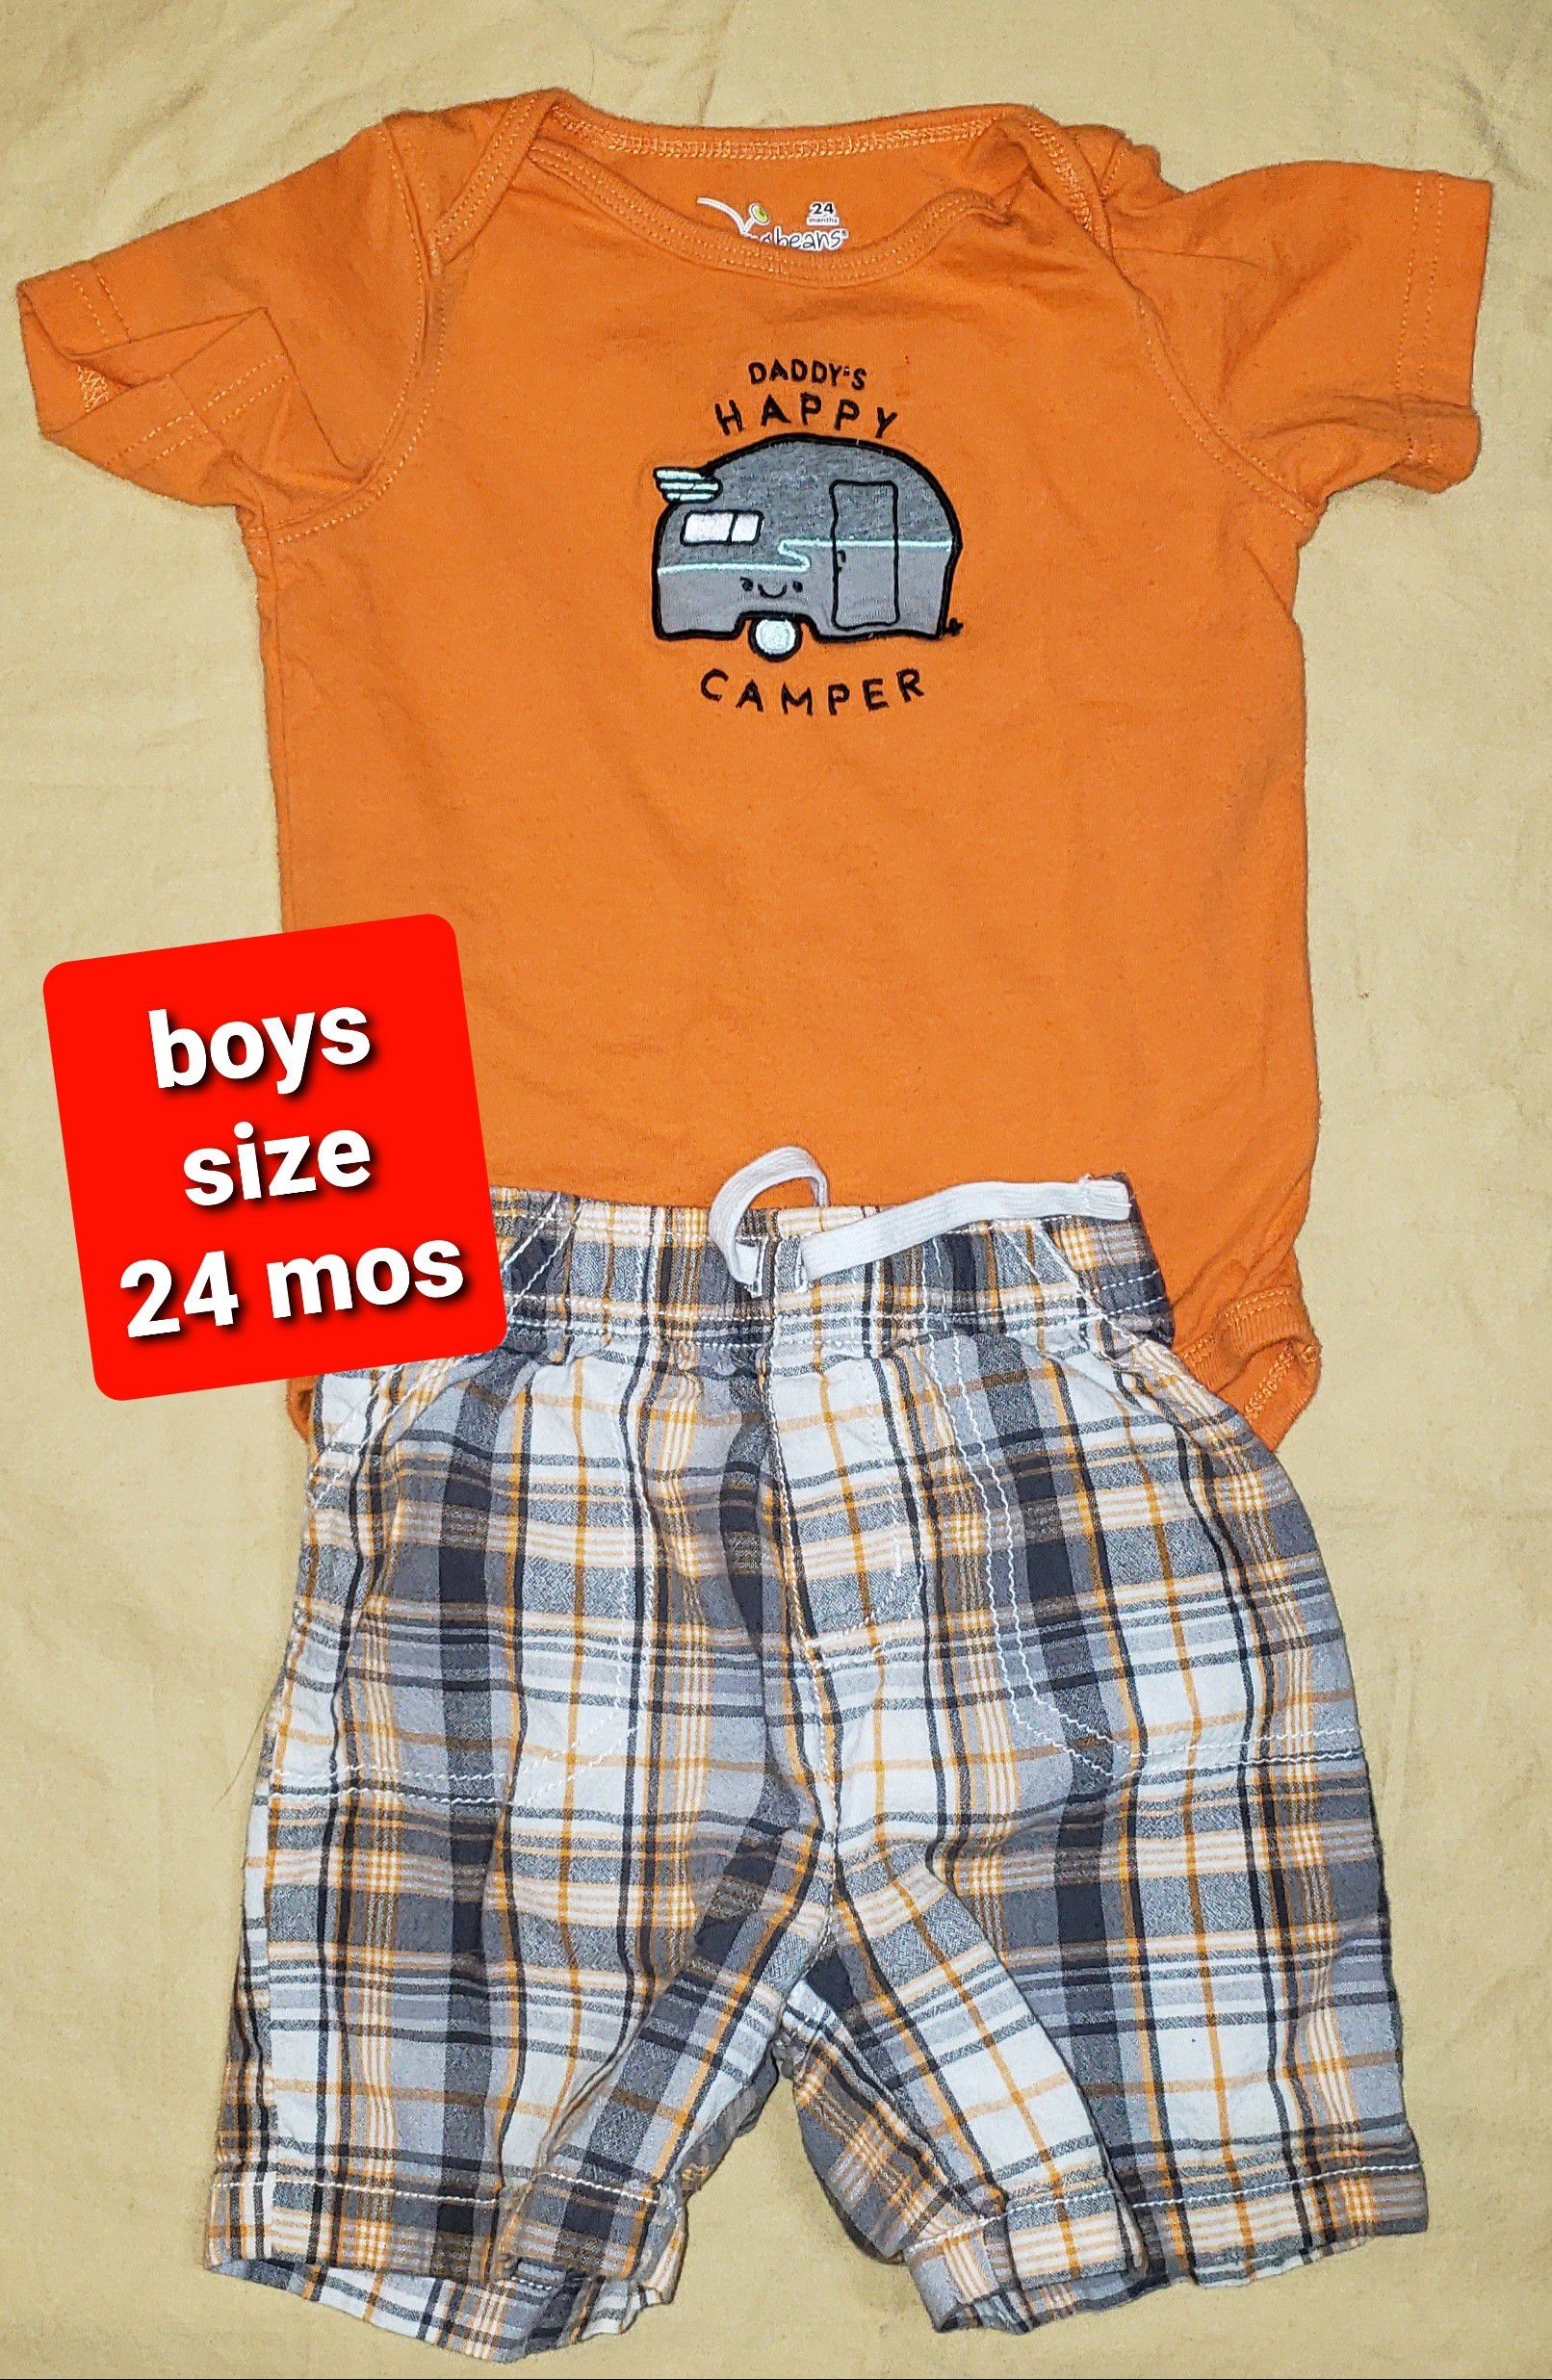 Boys size 24 months Clothes - Daddy's Happy Little Camper Onesie with Plaid Shorts (#233)